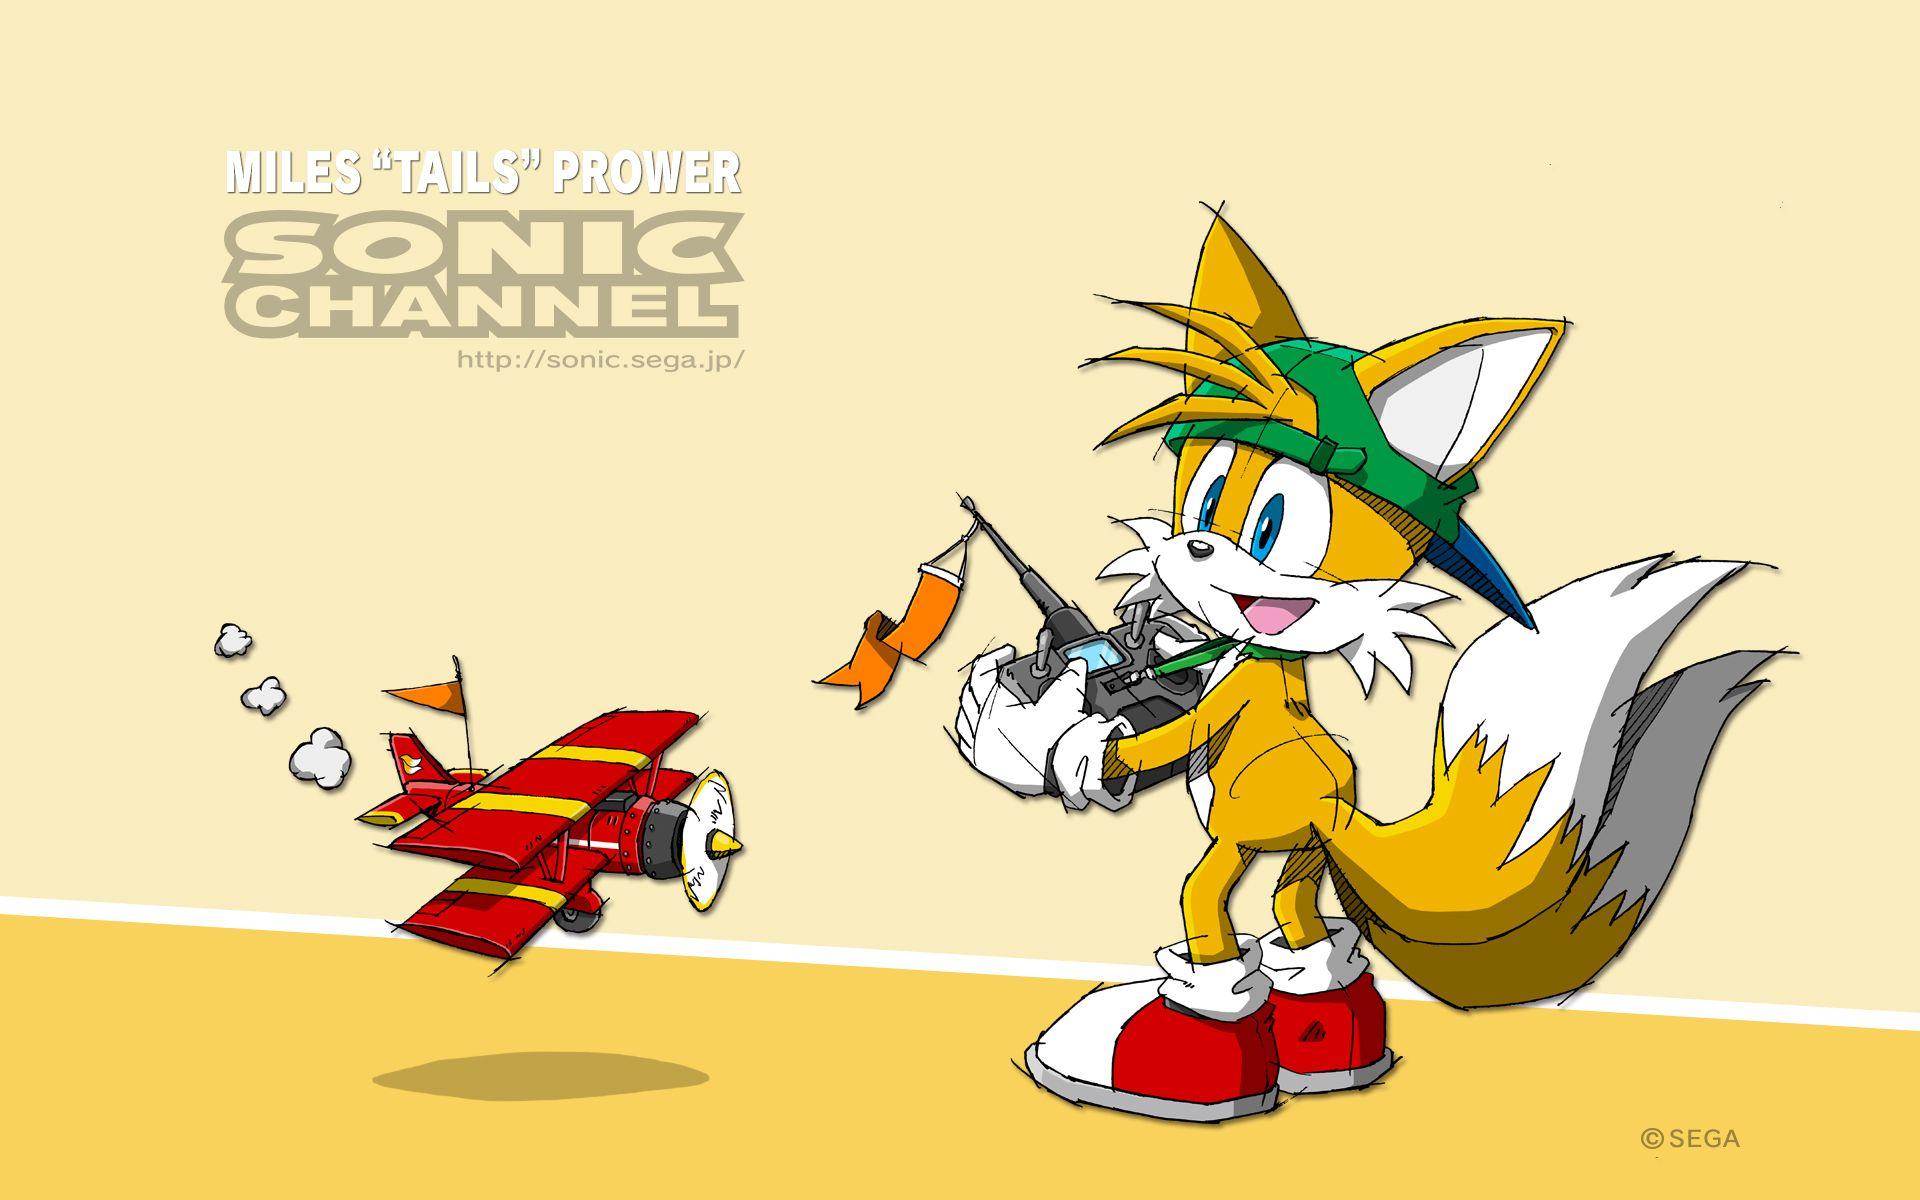 Tails and his toy. Sonic the Hedgehog